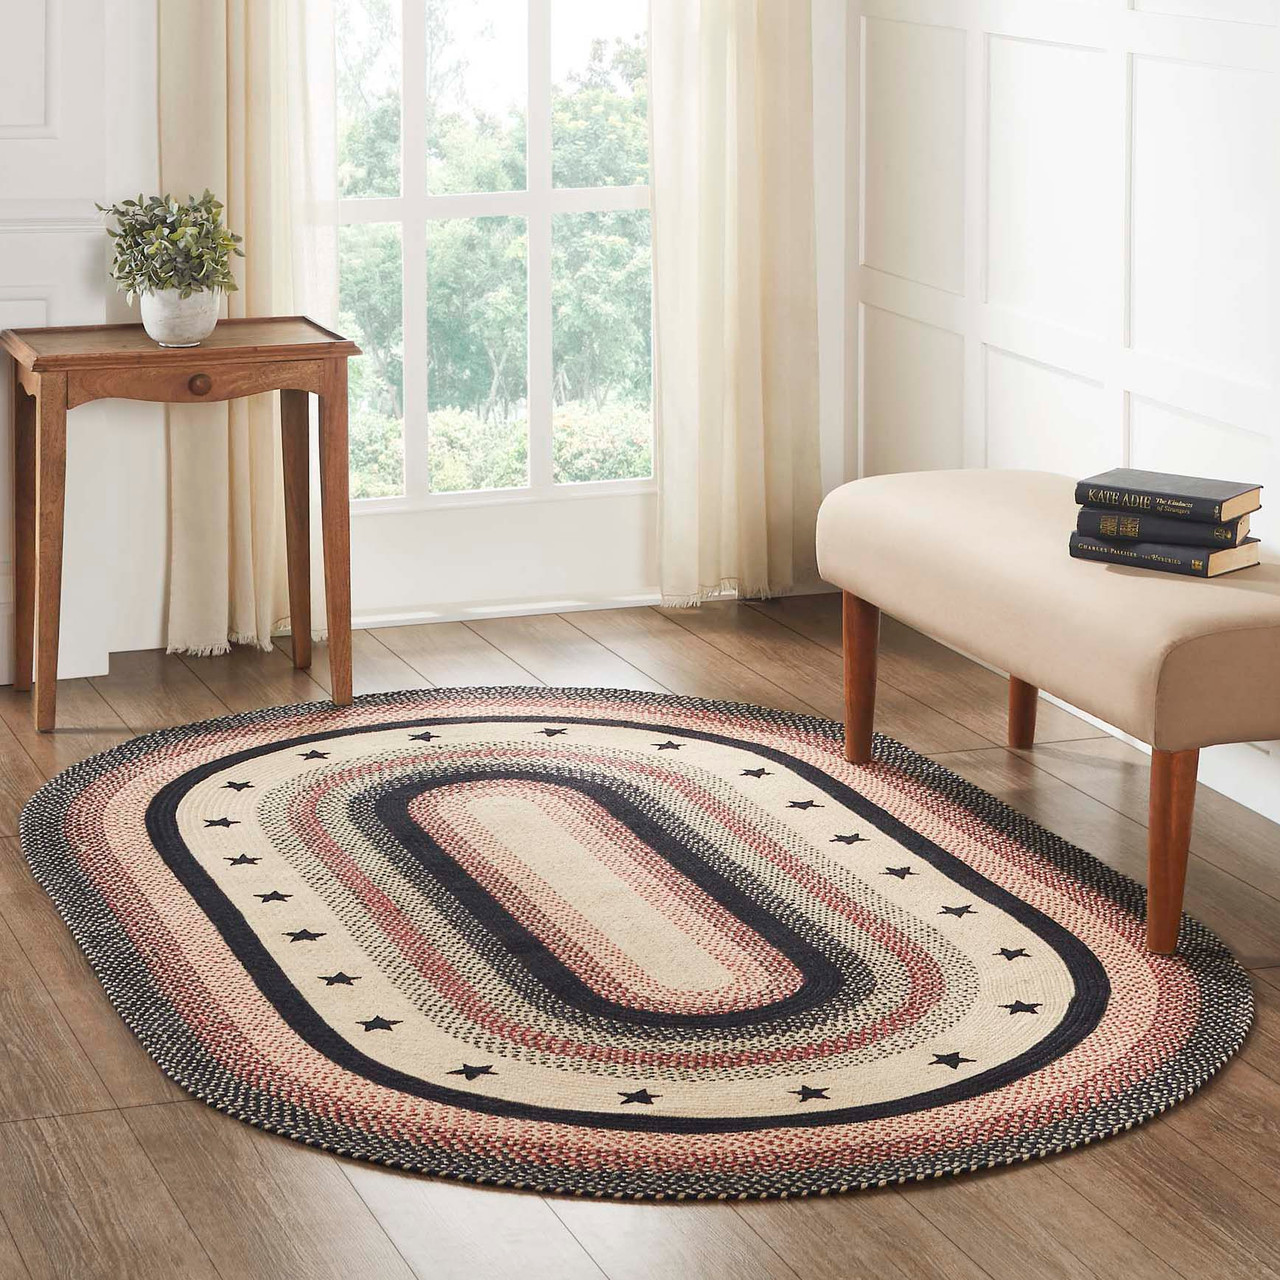 VHC Brands - Colonial Star Braided Area Rug - Natural & Black - 60 x 96